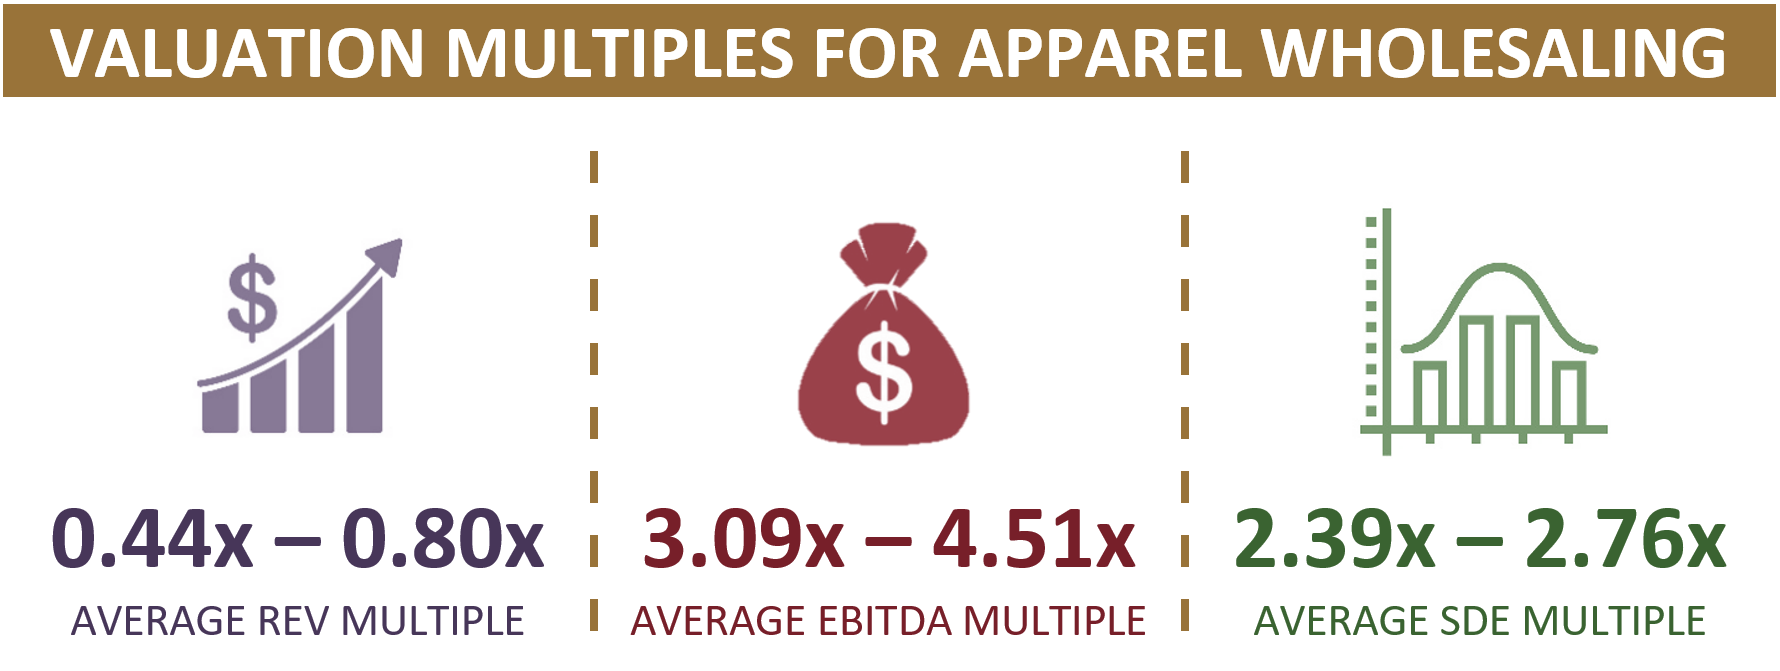 Valuation Multiples For Apparel Wholesalers